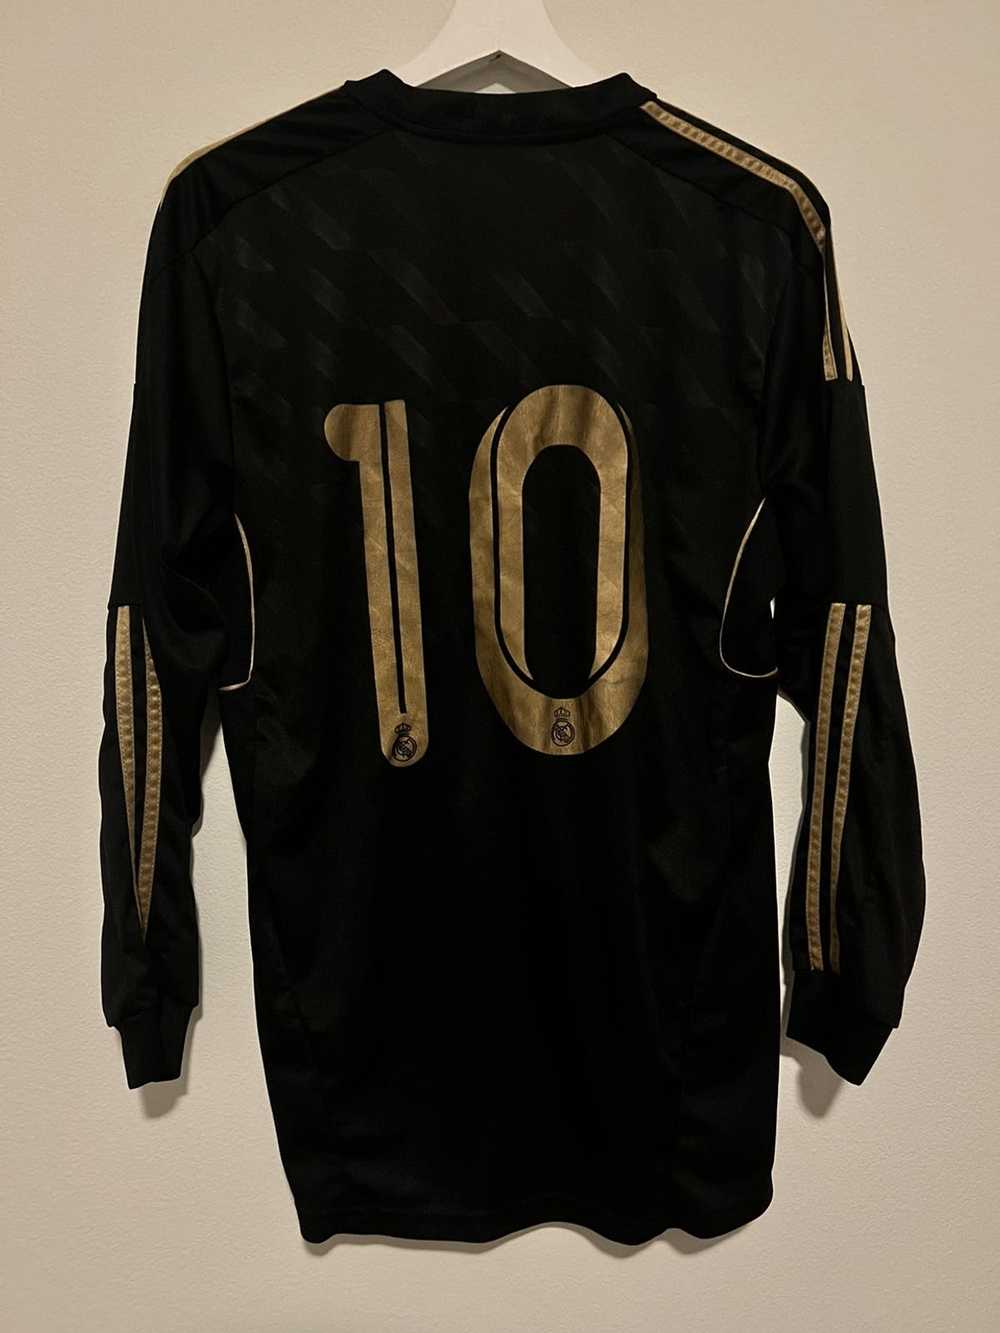 Real Madrid Real Madrid long sleeve jersey - image 2